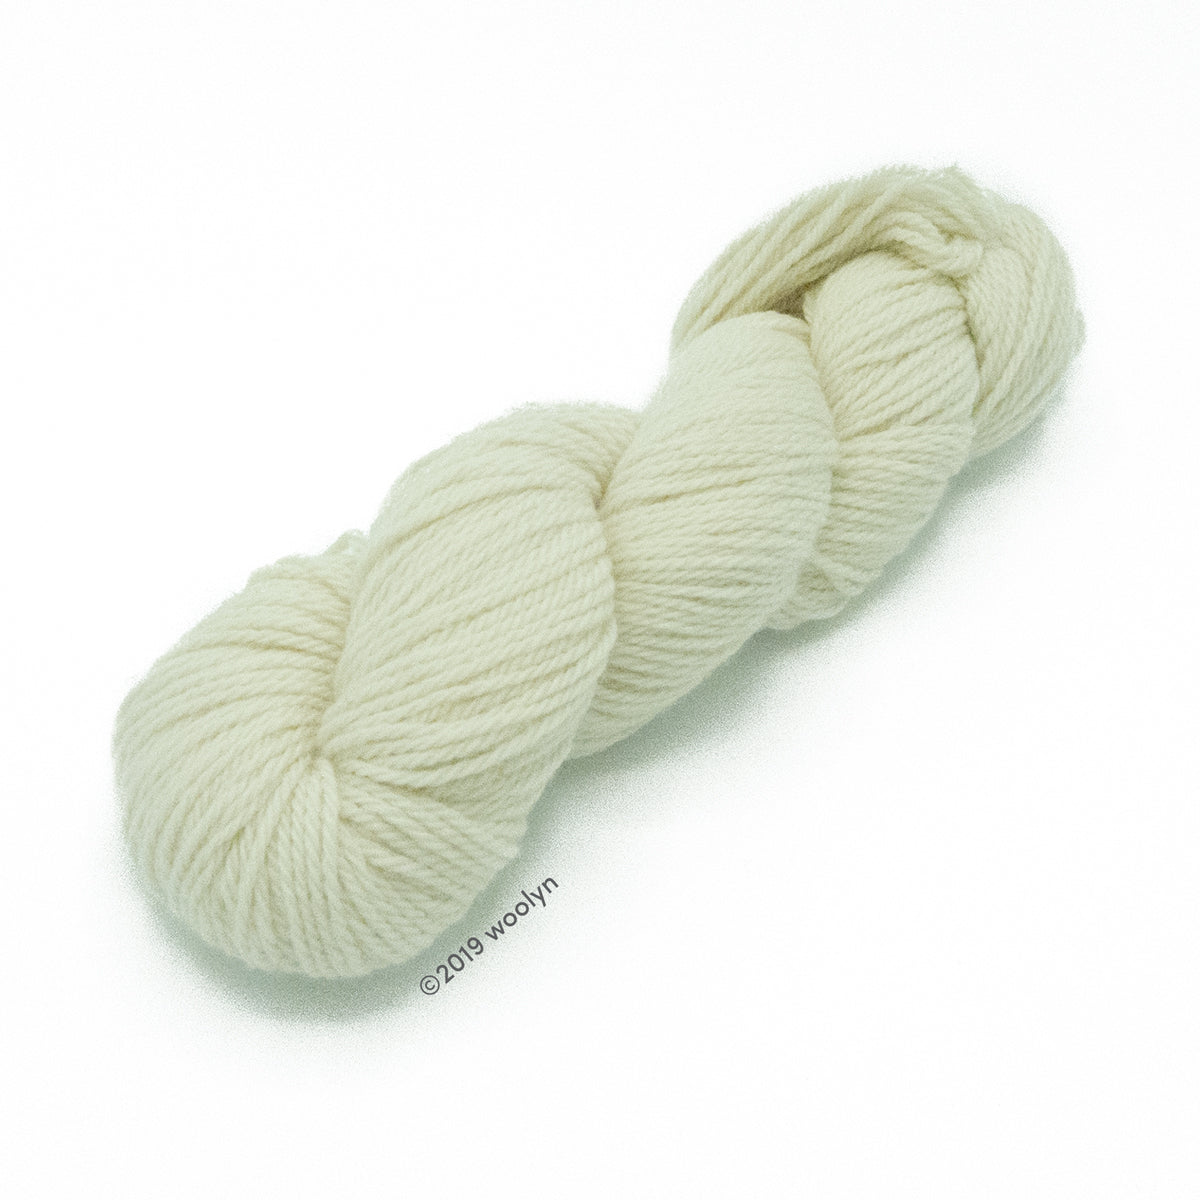 North Light Fibers Spring St in Pale Maiden, a bright white color.